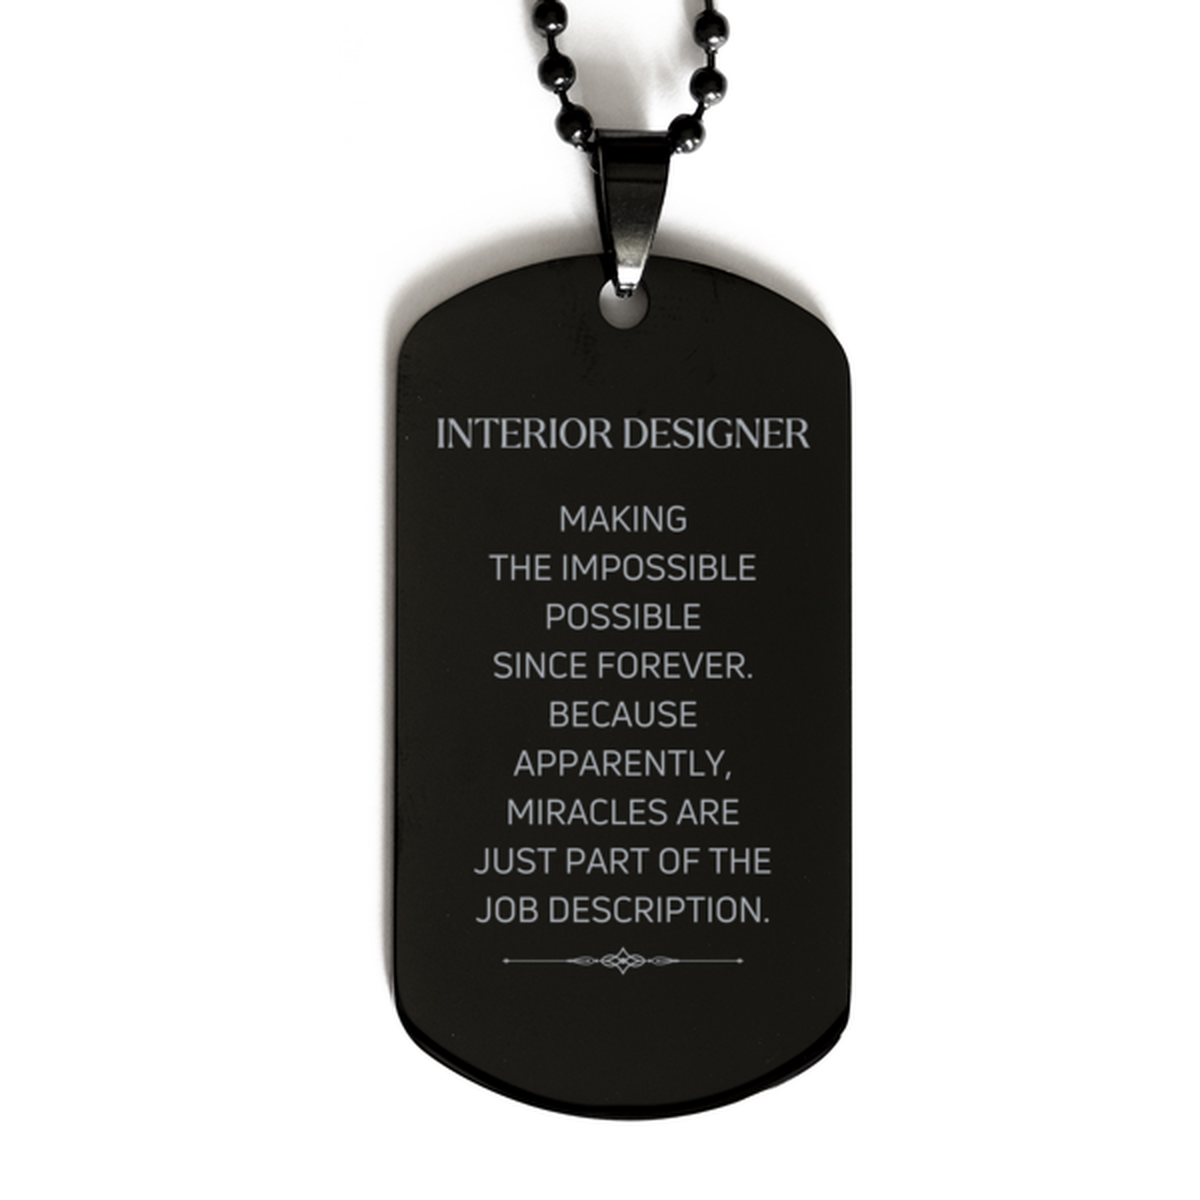 Funny Interior Designer Gifts, Miracles are just part of the job description, Inspirational Birthday Black Dog Tag For Interior Designer, Men, Women, Coworkers, Friends, Boss